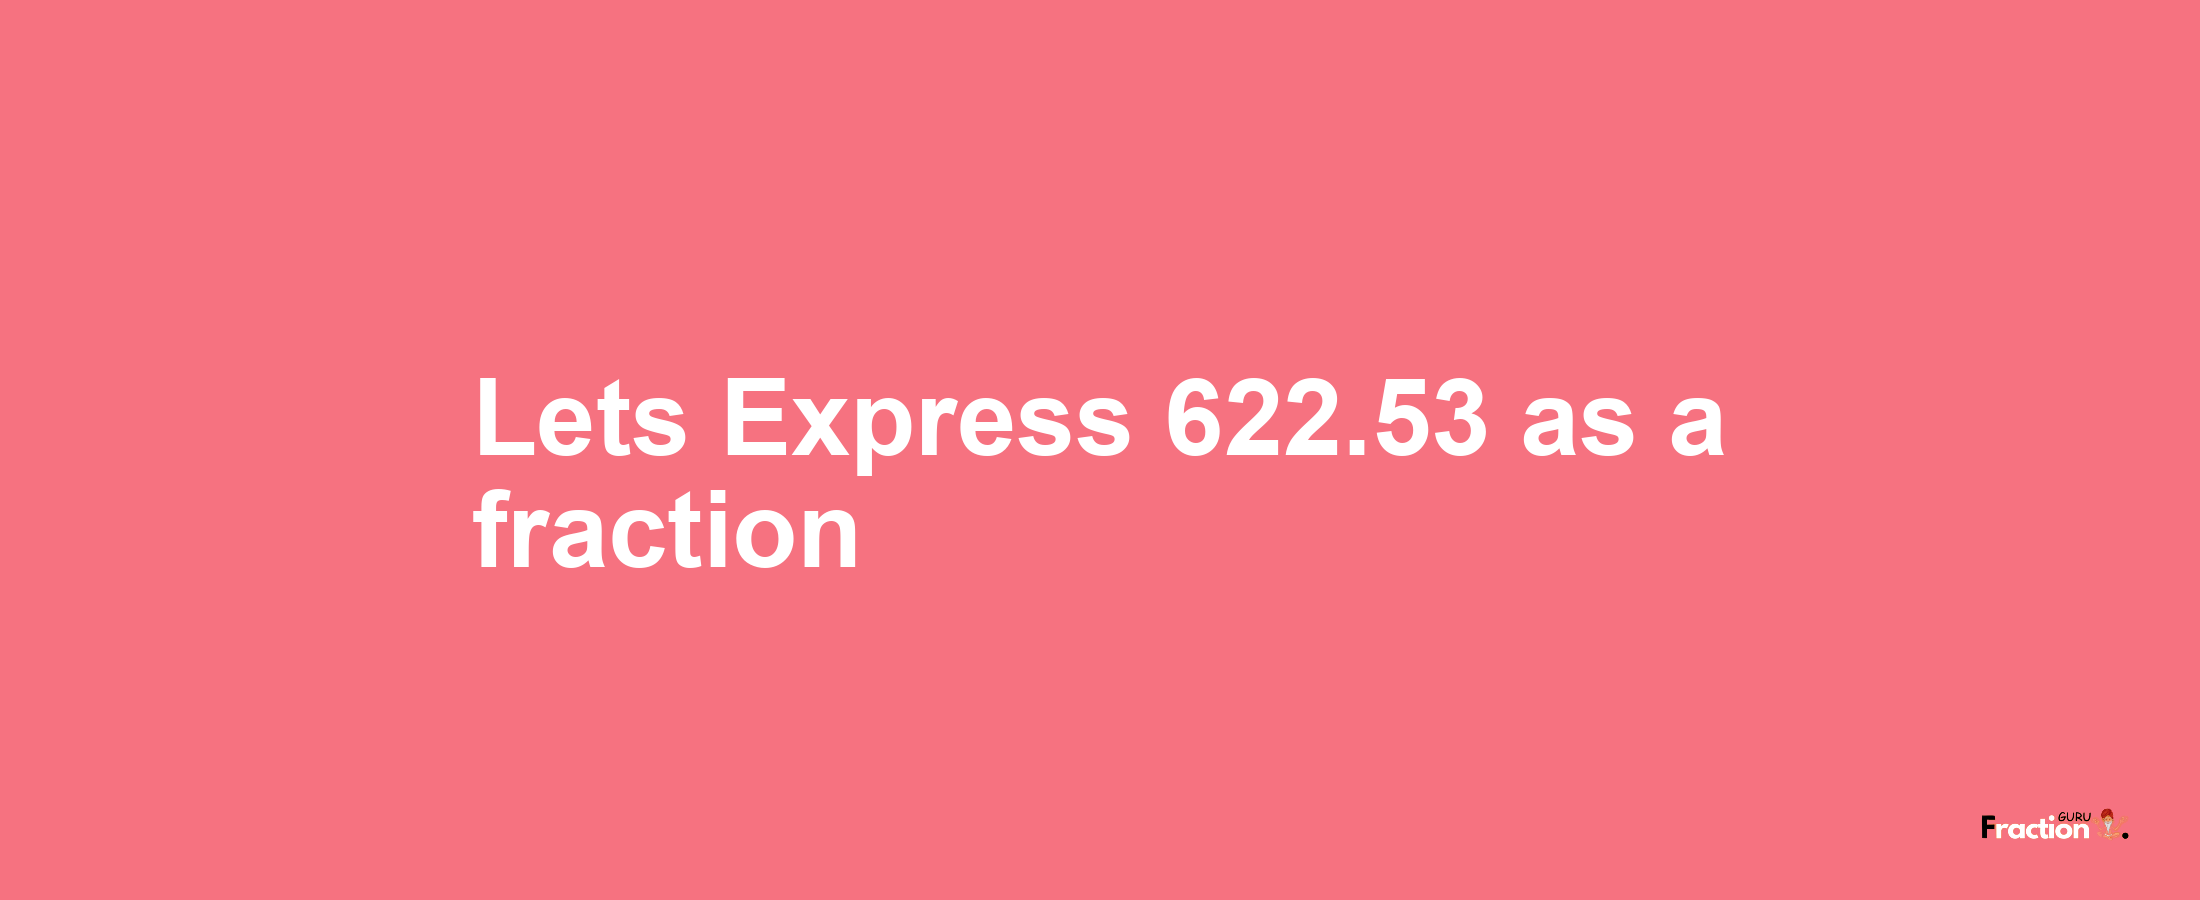 Lets Express 622.53 as afraction